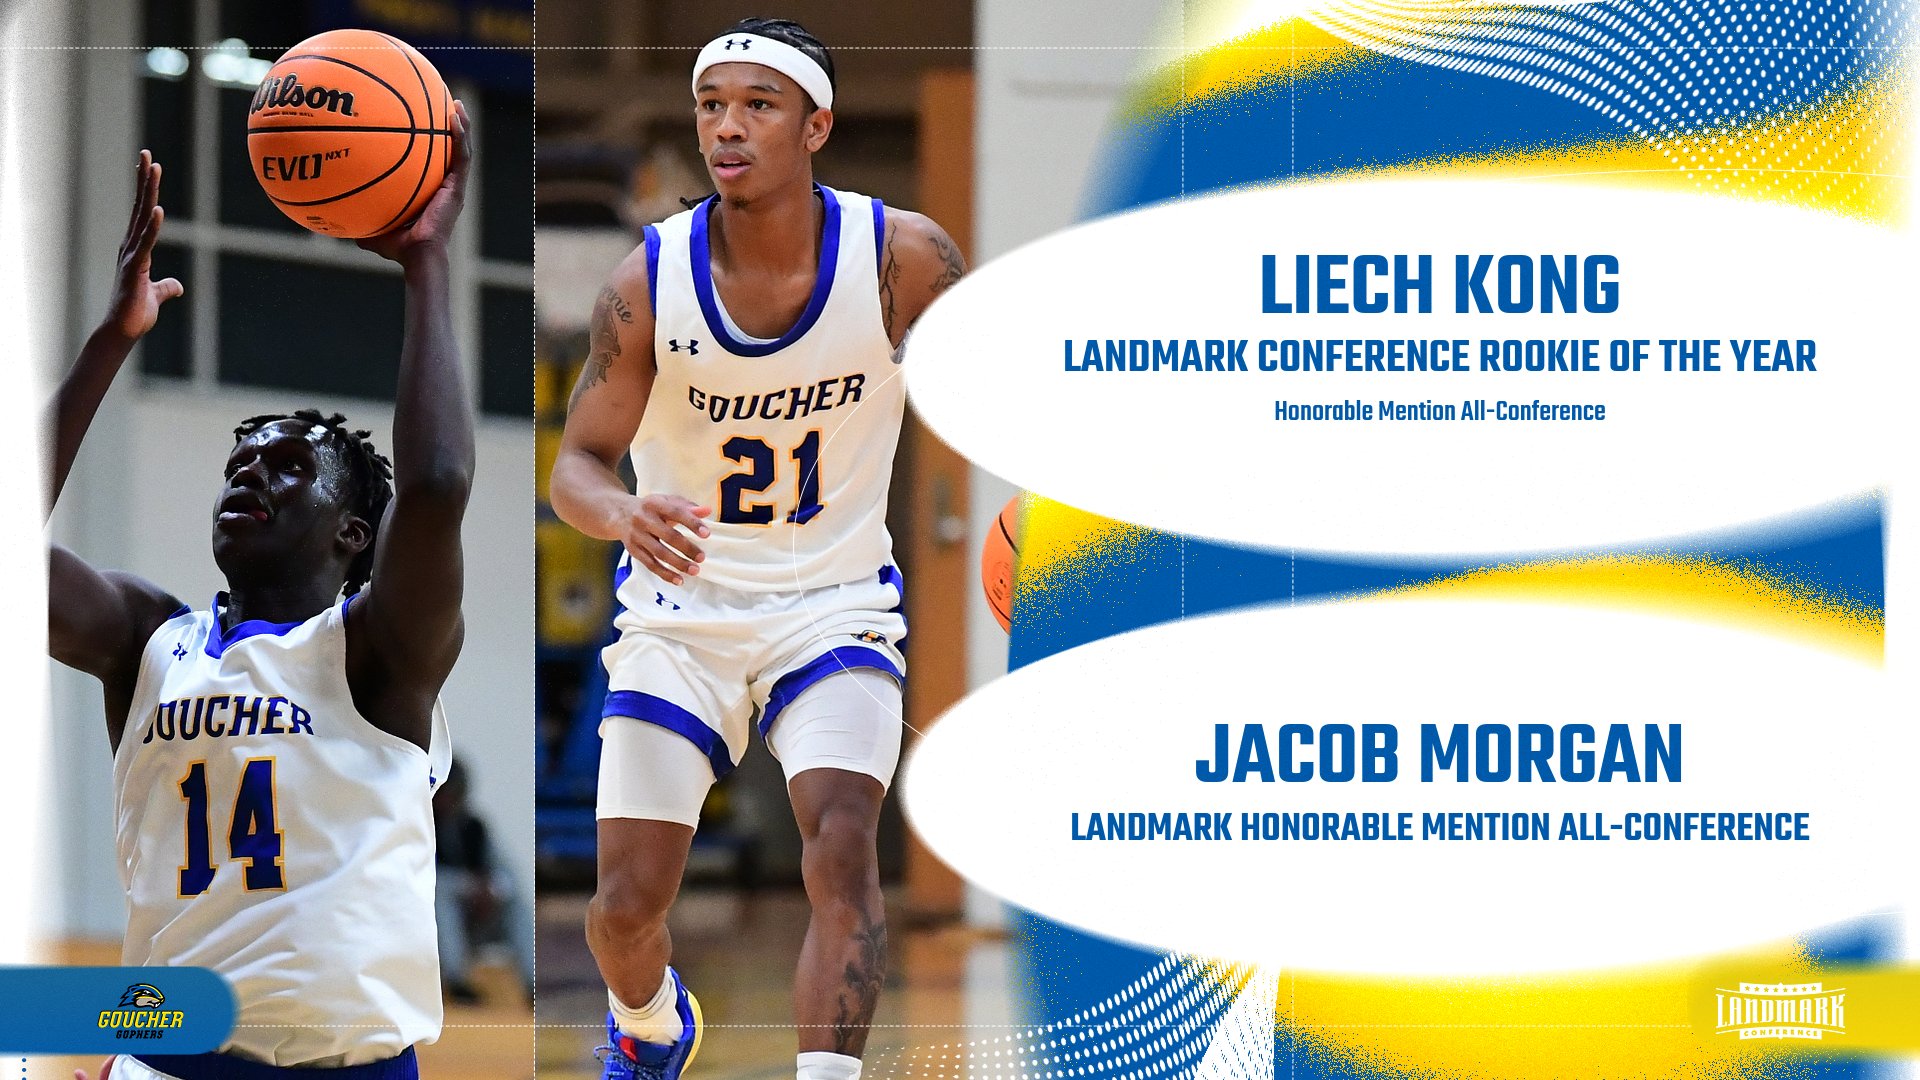 Liech Kong Selected as Landmark Rookie of the Year, Kong, Jacob Morgan Earn Honorable Mention All-Conference